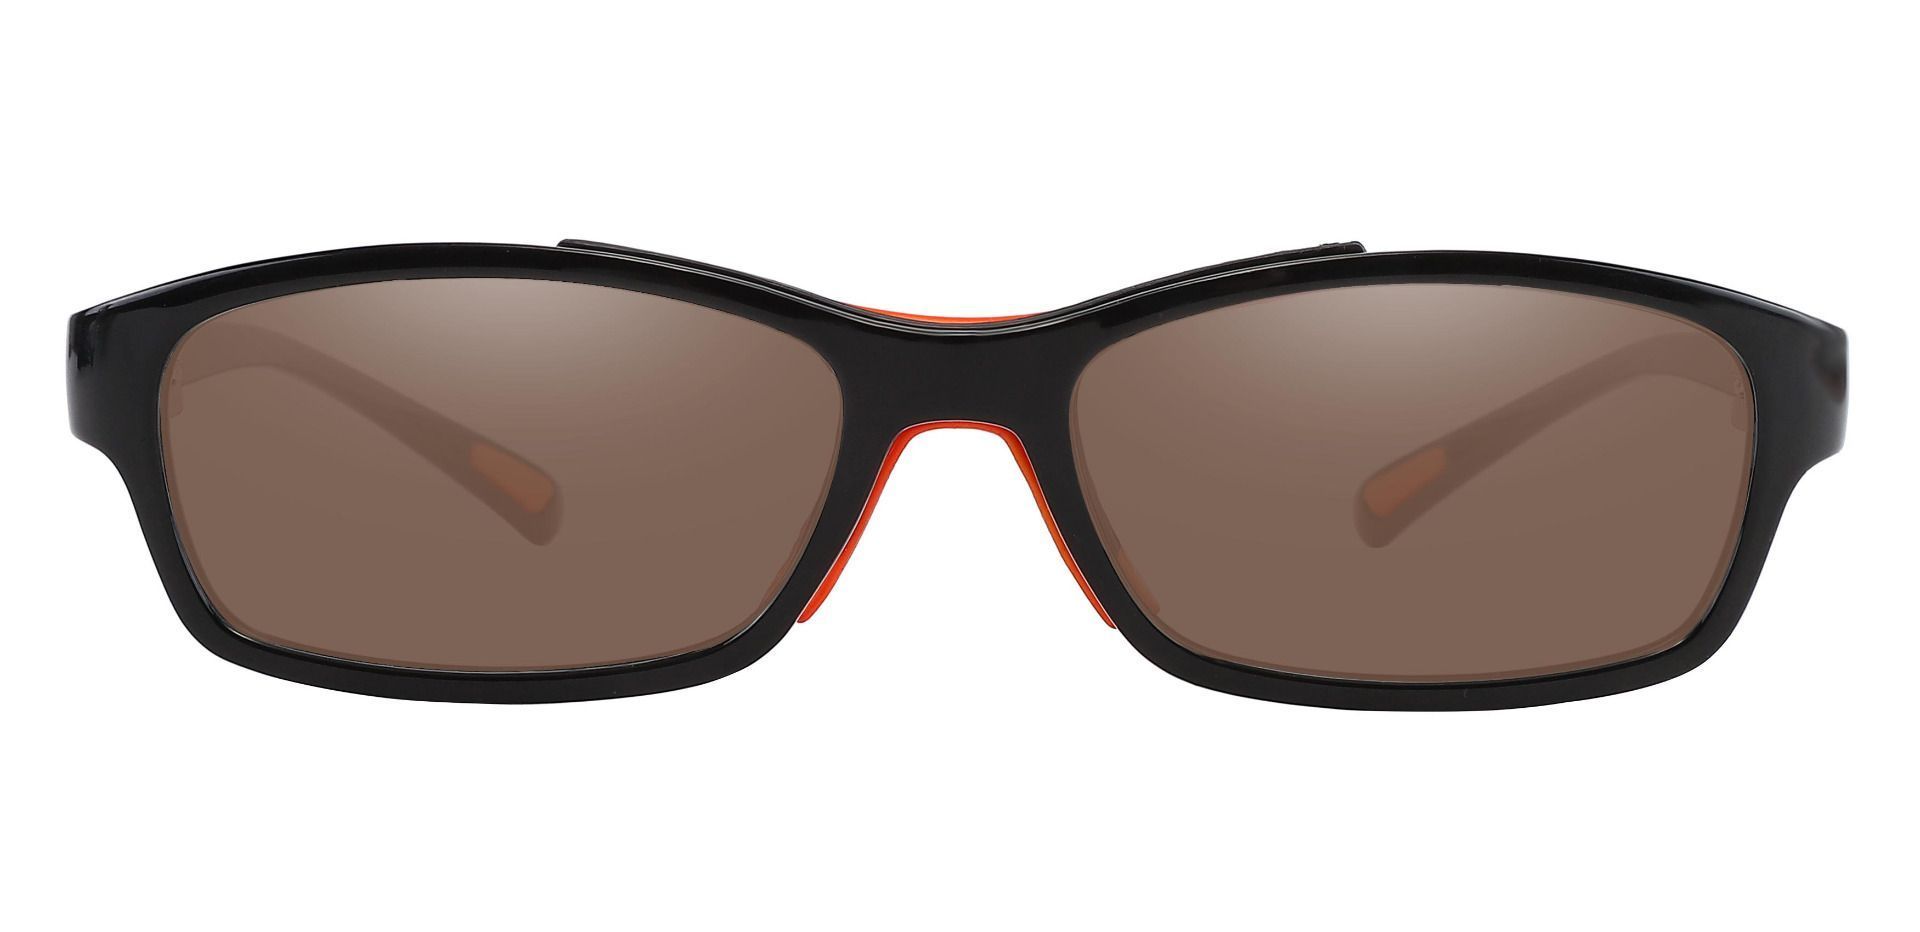 Glynn Rectangle Non-Rx Sunglasses - Black Frame With Brown Lenses